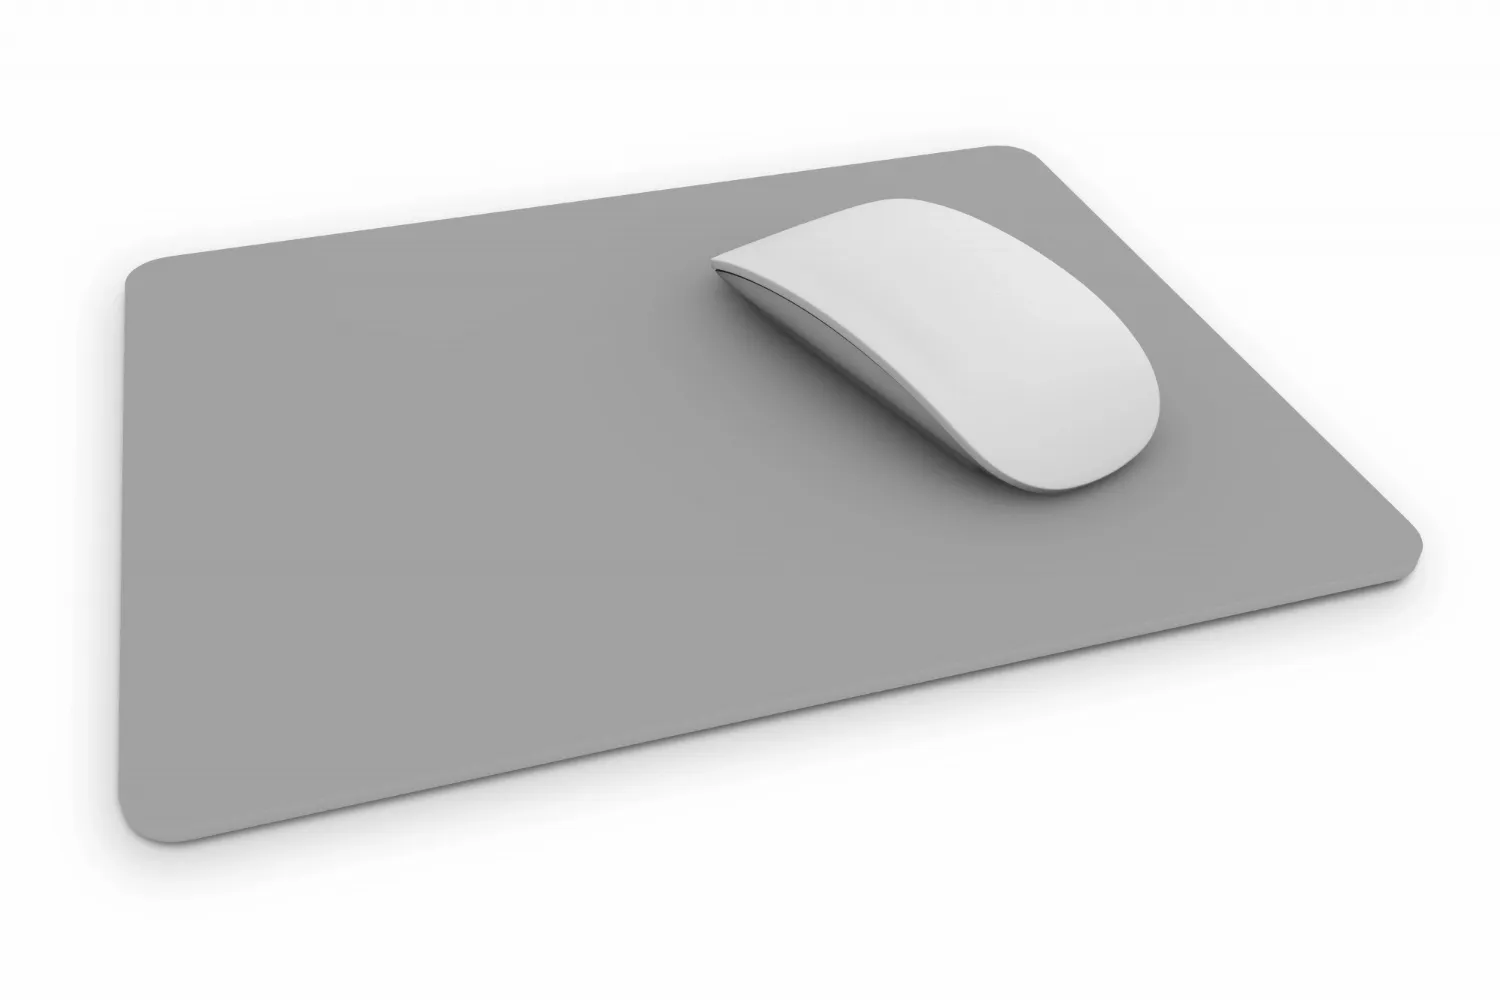 Square cute mousepad and white mouse